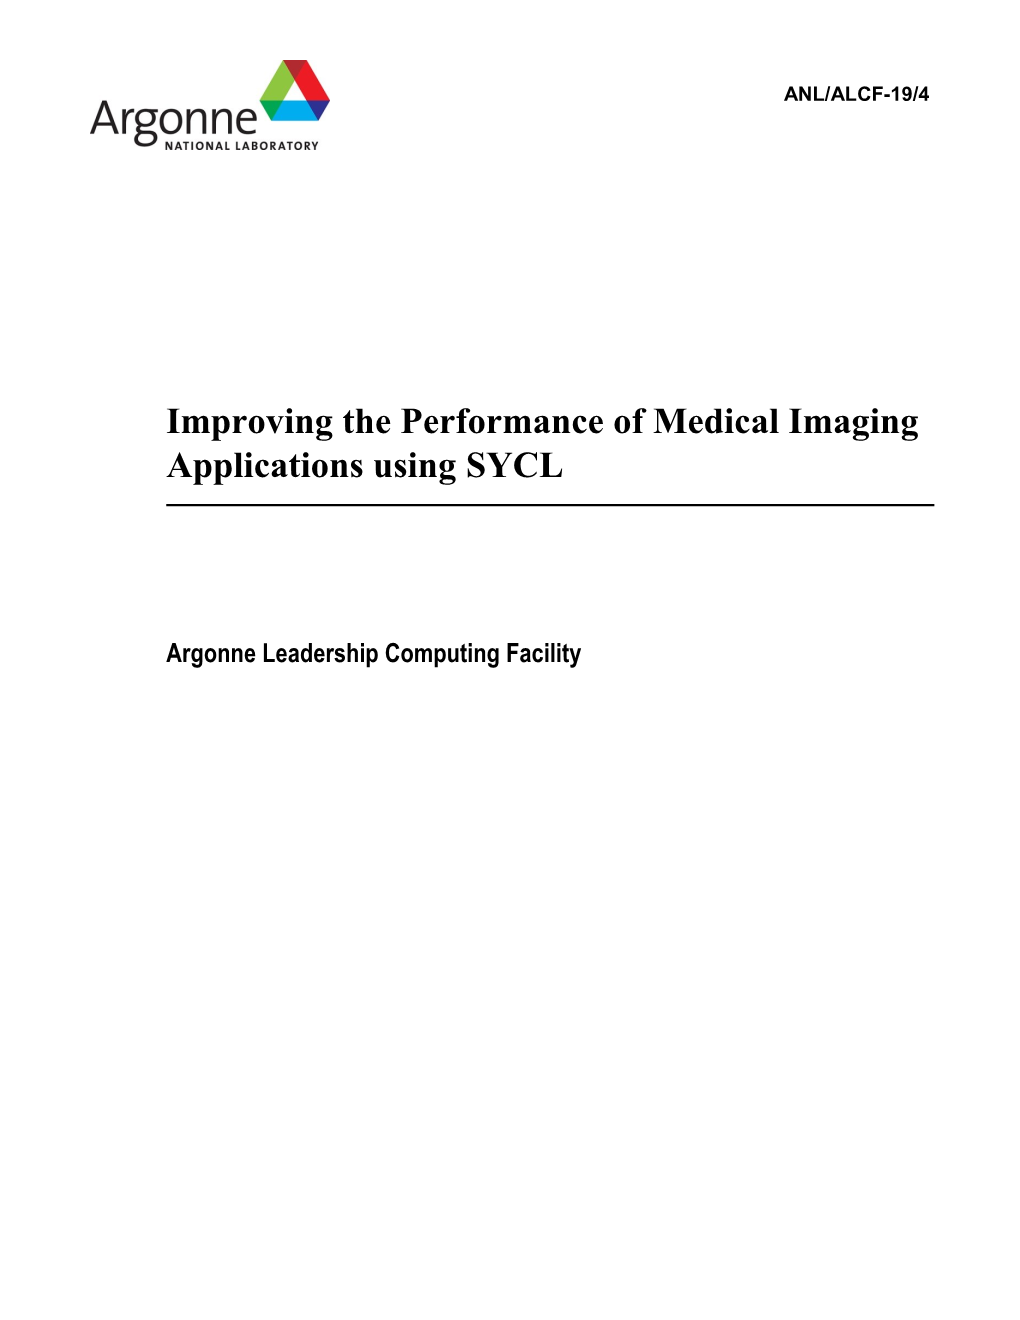 Improving the Performance of Medical Imaging Applications Using SYCL